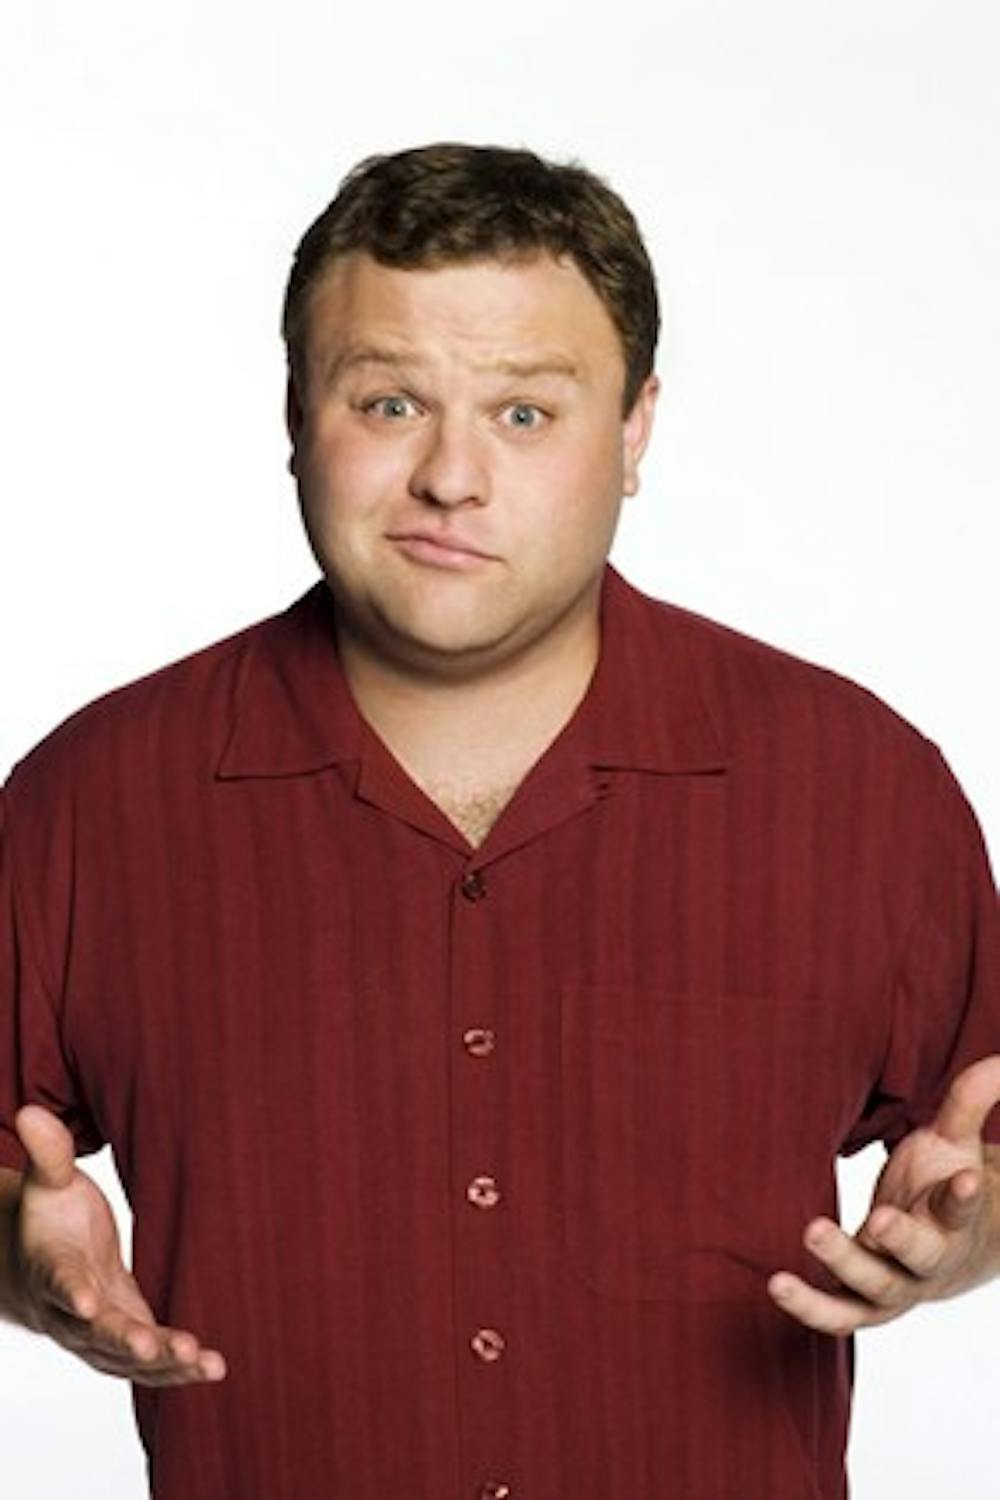 Frank Caliendo as Himself
Photo courtesy of TBS Public Relations